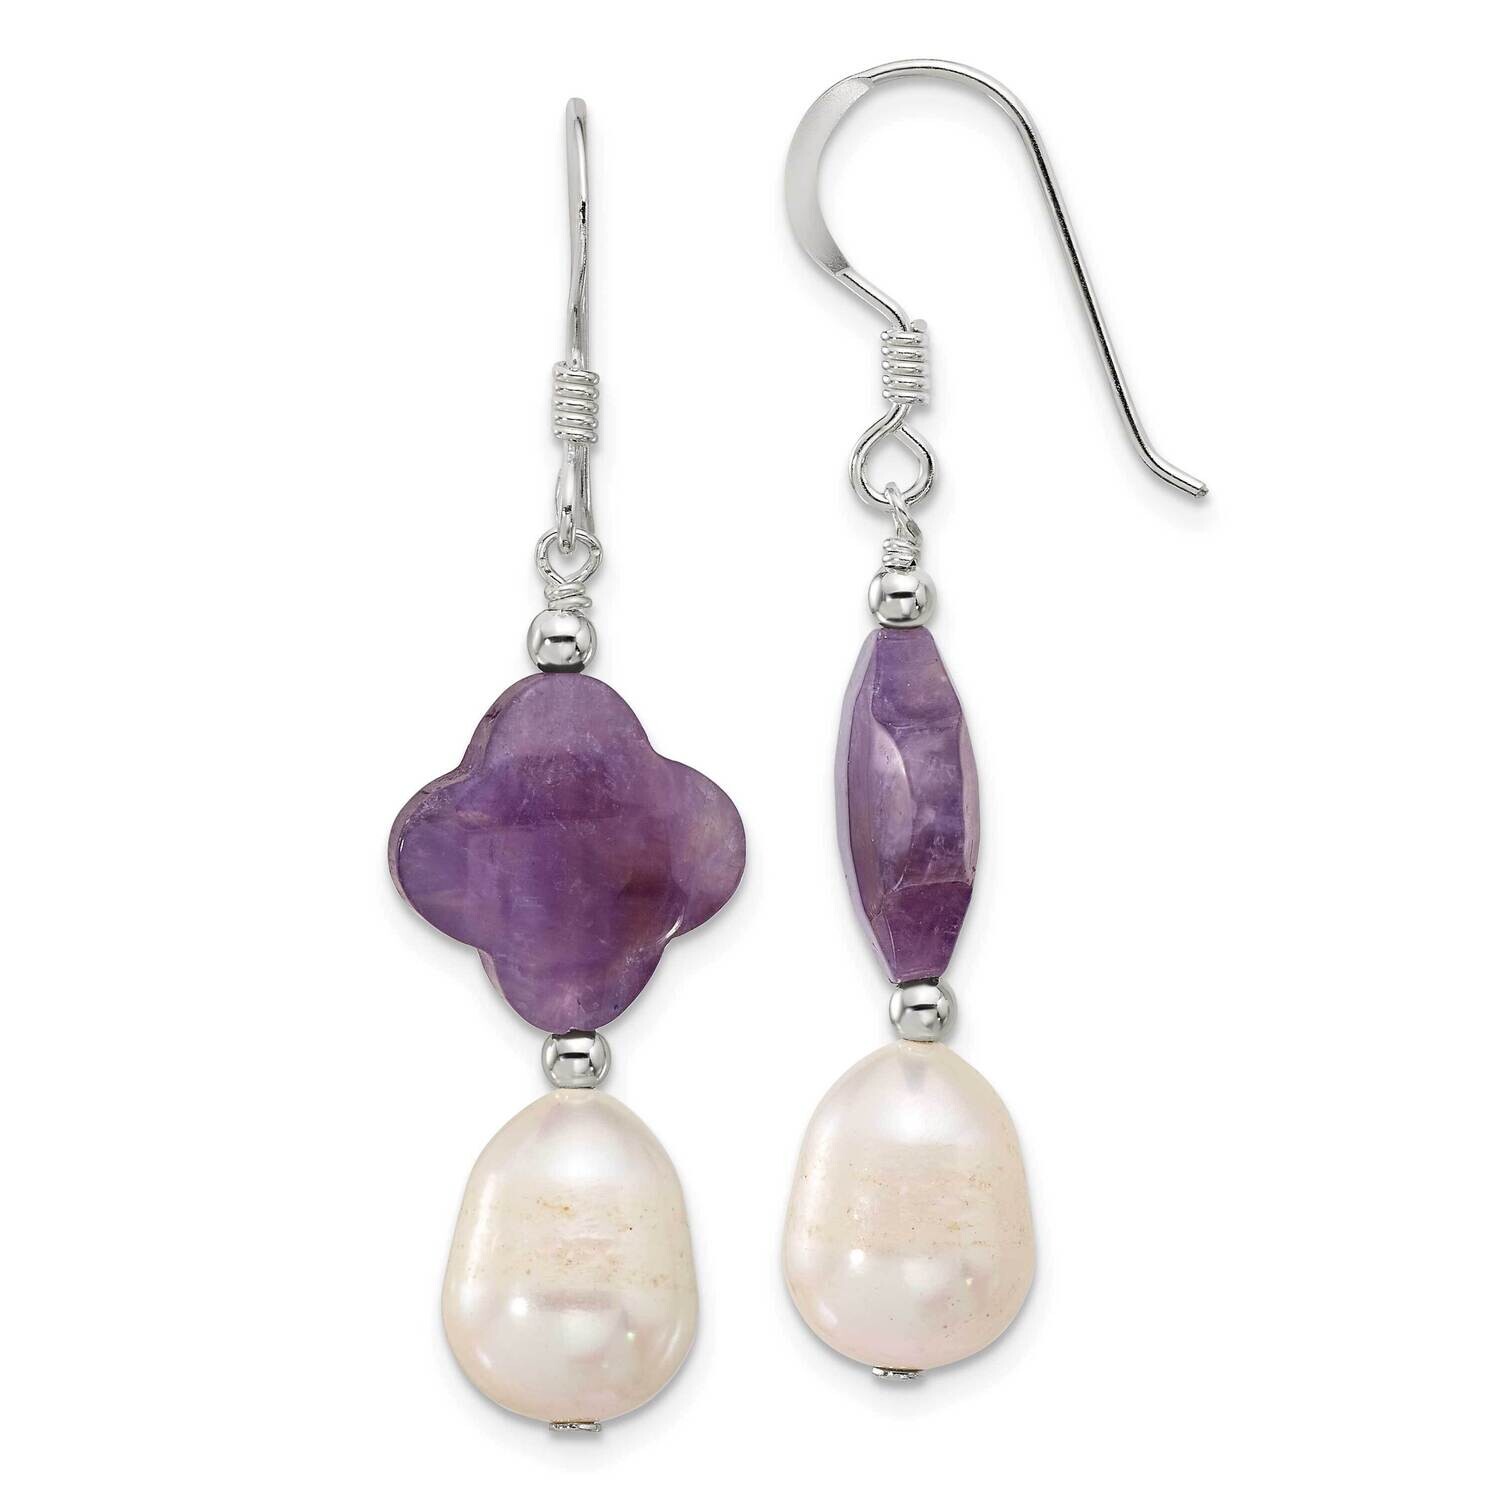 Amethyst Clover Fwc Pearl Dangle Earrings Sterling Silver Polished QE17303